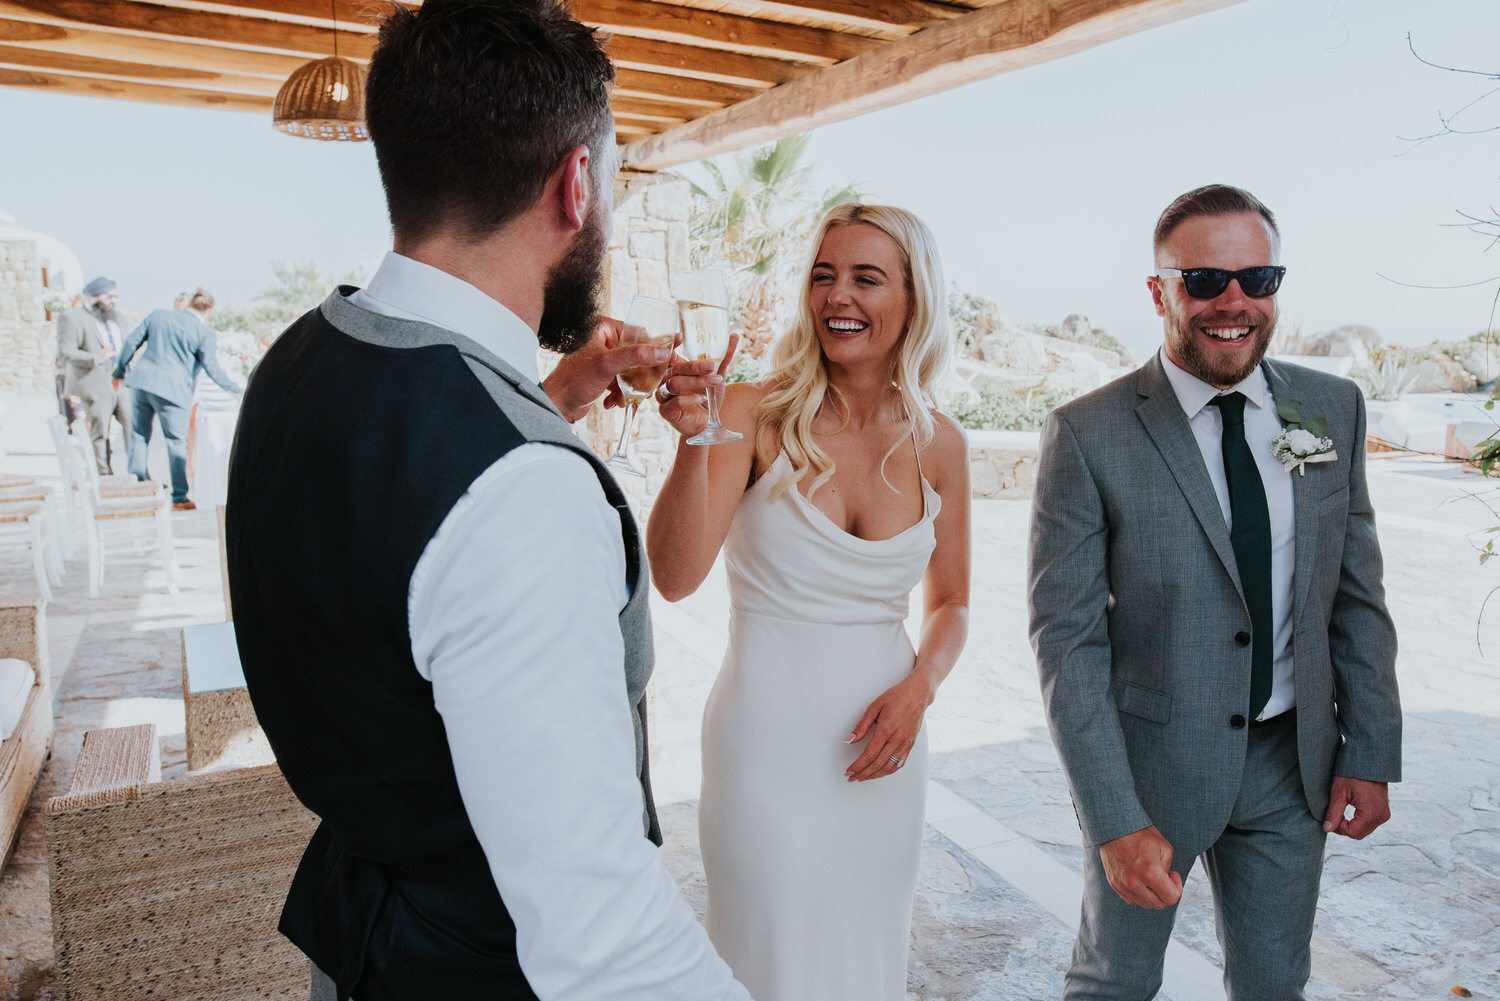 Mykonos wedding photographer: bride and groom smiling clinking champagne glasses with one of the guests.